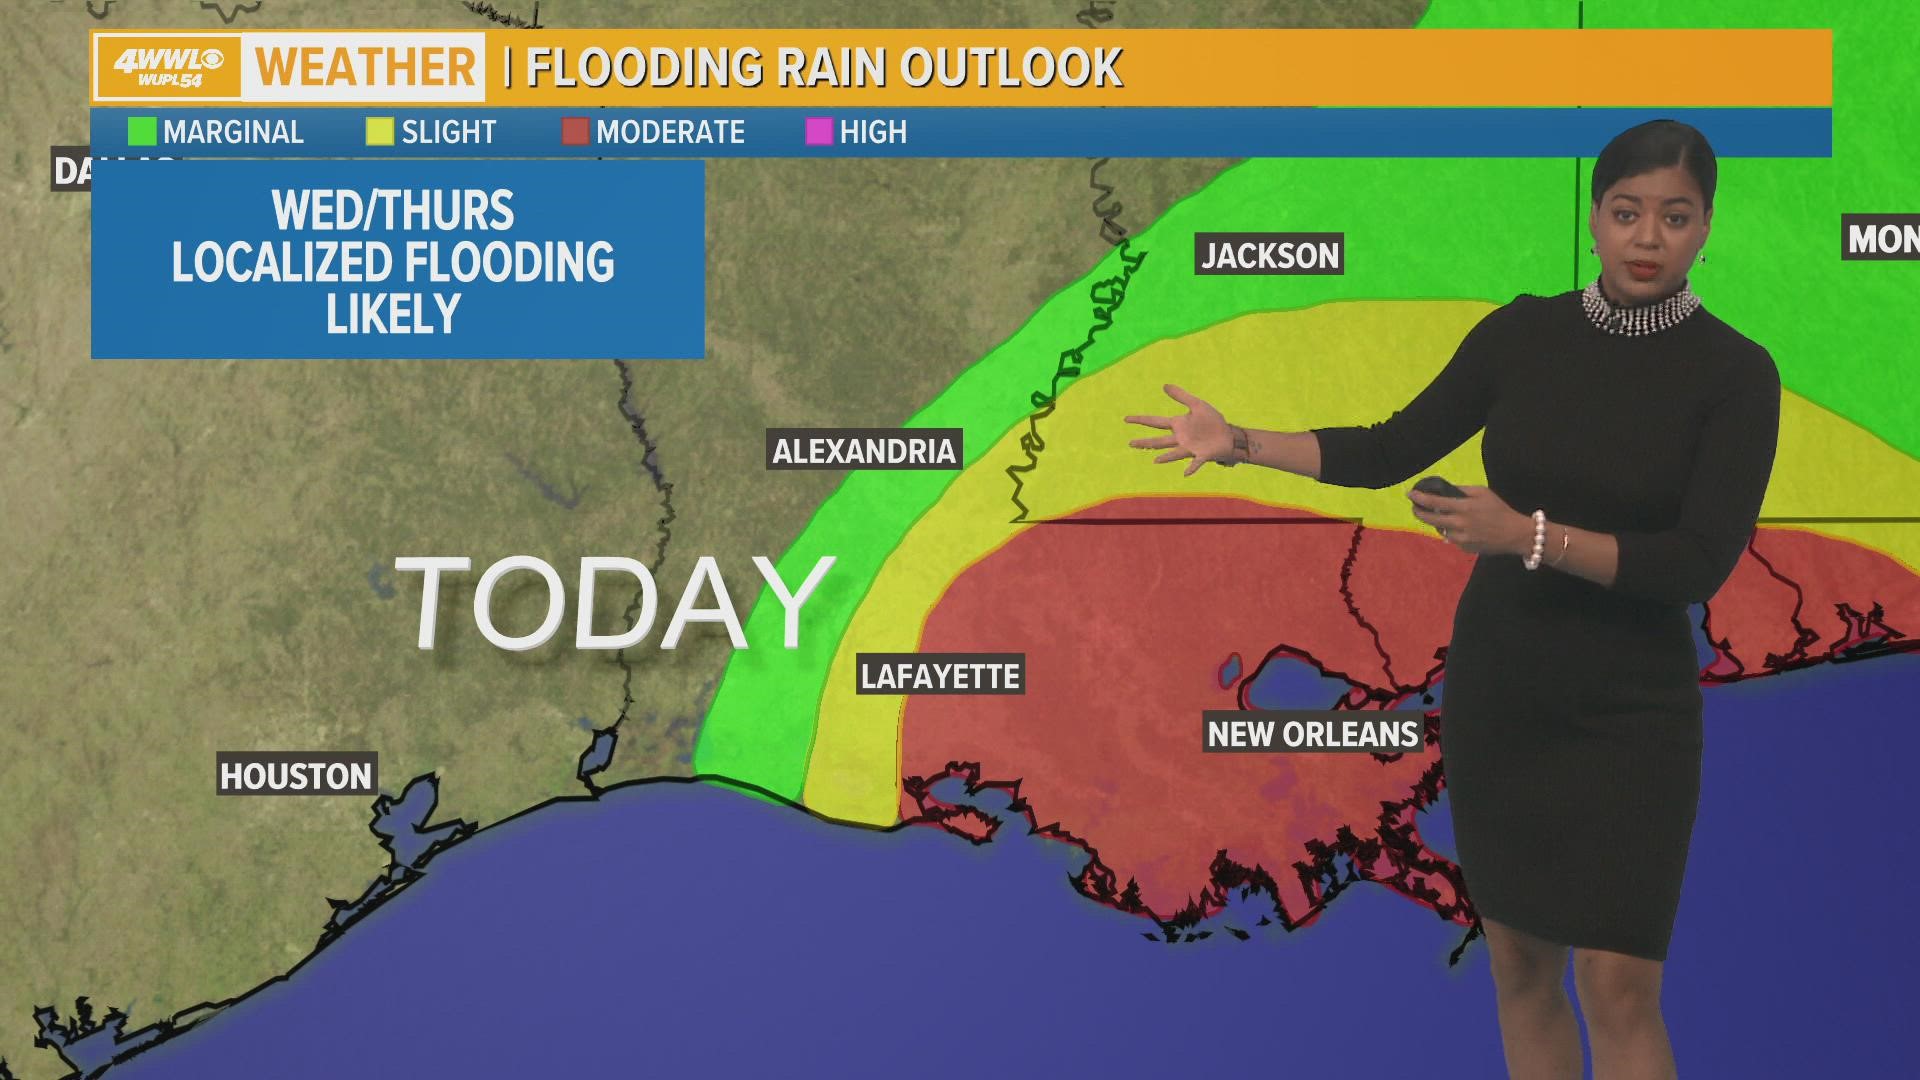 Some locations that will experience flash flooding include New Orleans, Slidell, Bogalusa, Covington, Franklinton, Pearl River, Abita Springs, Varnado, Madisonville,